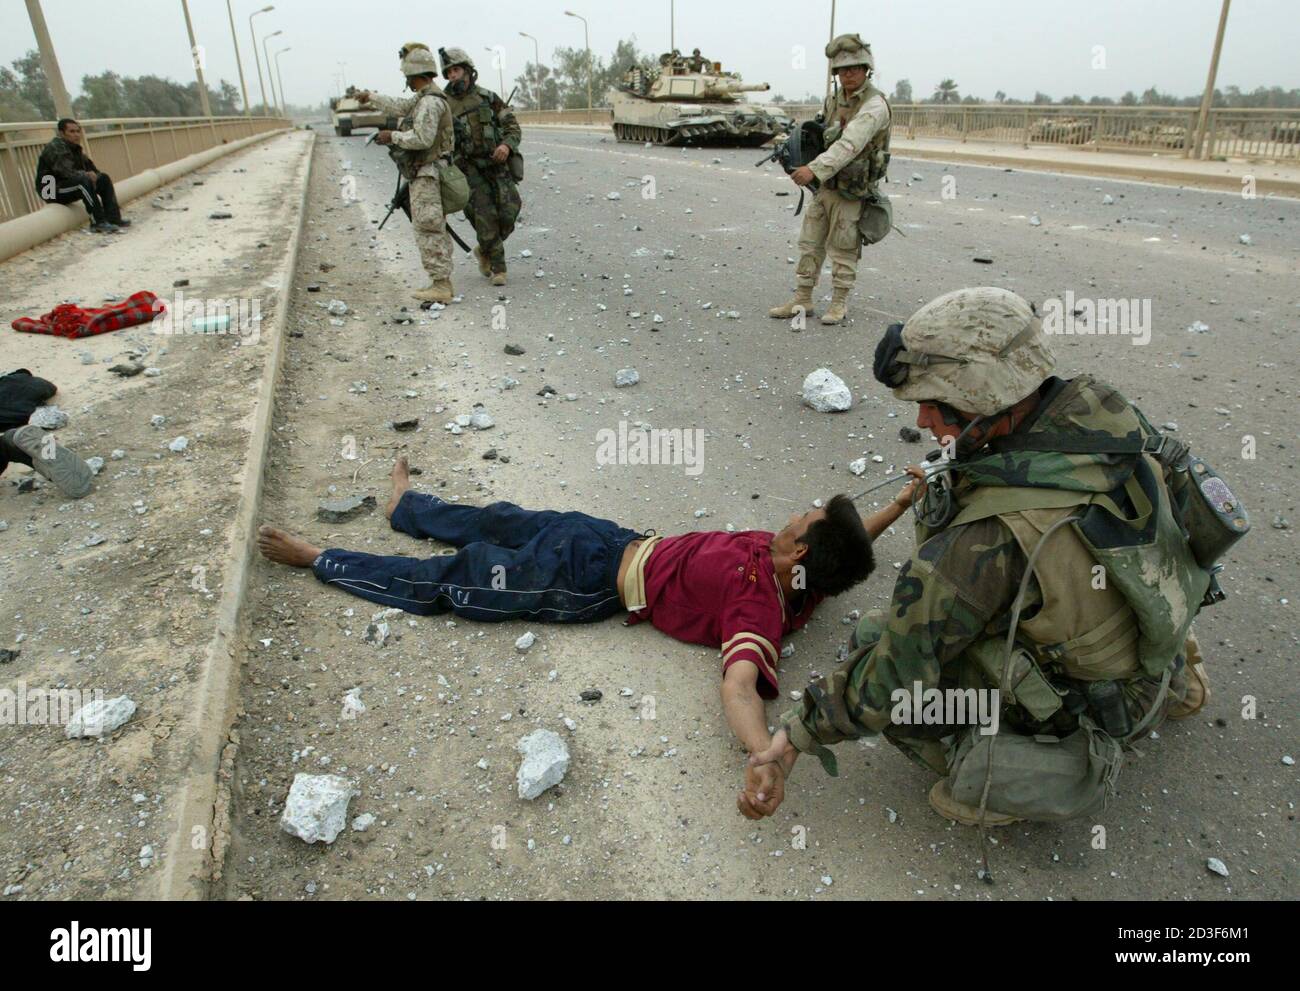 U.S. Marines from Lima Company, a part of a the 7th Marine Regiment, search men who they said were members of Iraqi Republican guard, dressed in civilian clothes for weapons on a bridge, in the suburbs of Baghdad on April 7, 2003. U.S. forces burst into the heart of Baghdad on Monday and entered two palace complexes of President Saddam Hussein, but they said the operation was an armoured raid not intended to hold territory.  REUTERS/Oleg Popov REUTERS Stock Photo